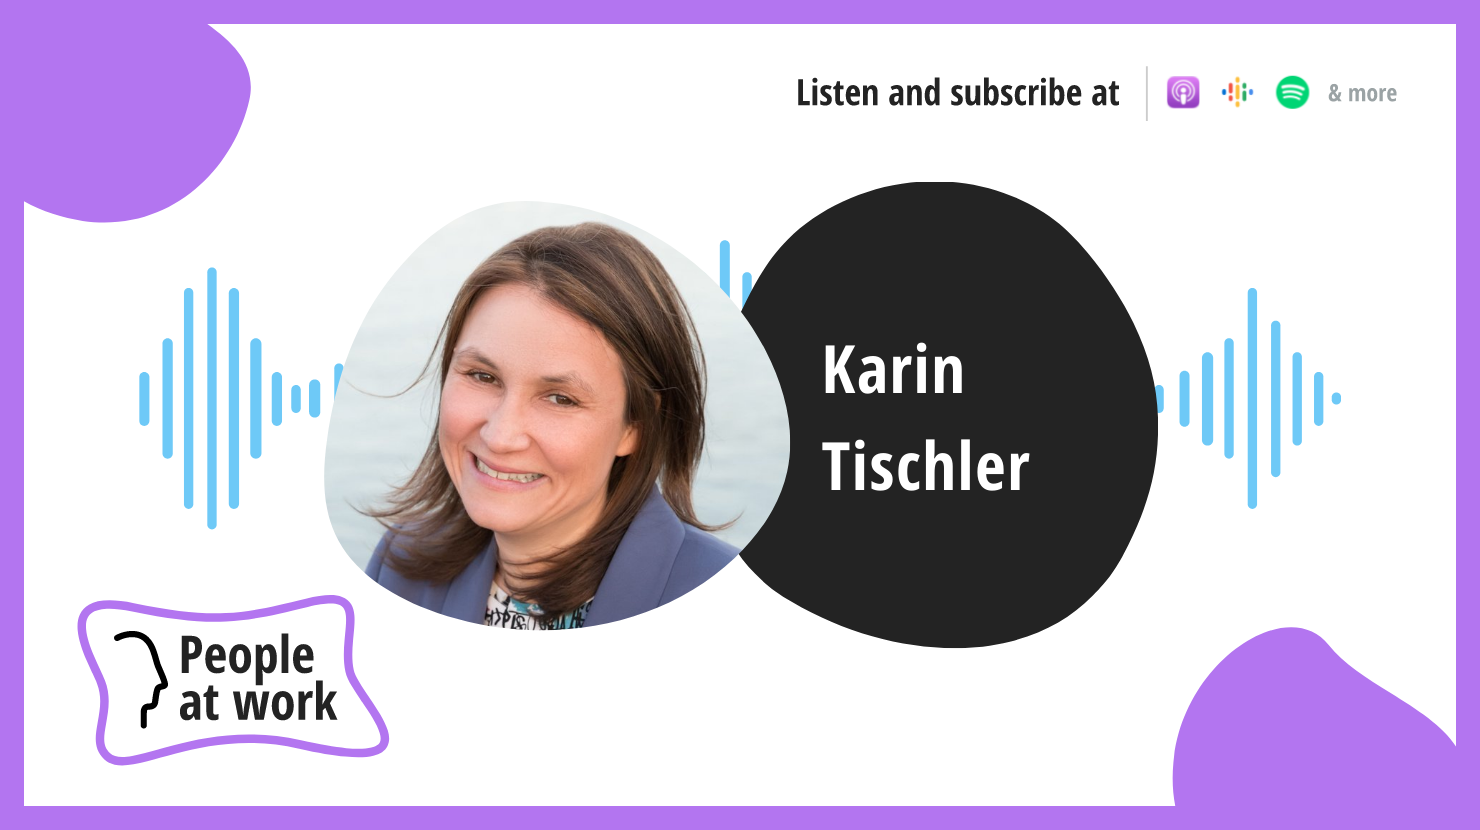 Top sharing is the way forward for flexible work with Karin Tischler